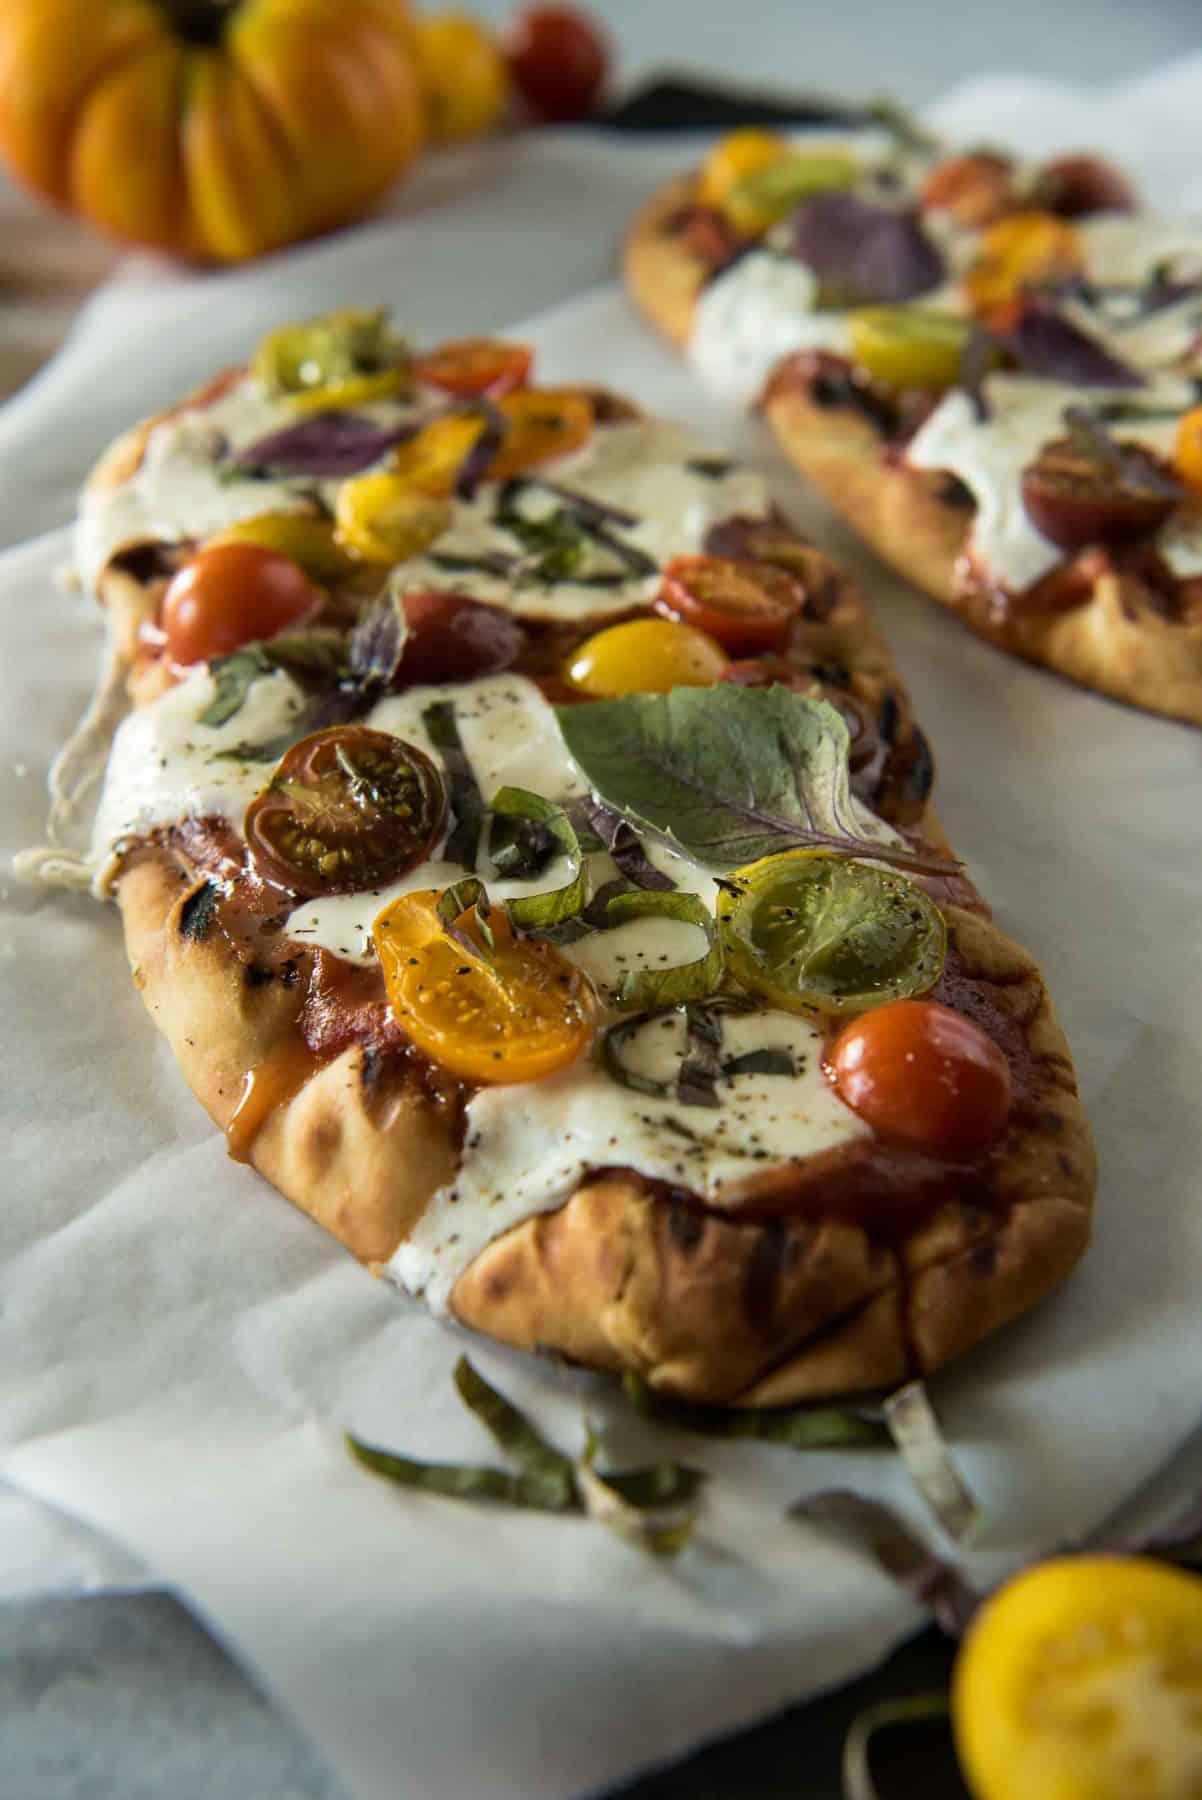 In need of a quick weeknight dinner? This Grilled Margherita Flatbread is all the delicious pizza taste you want with much less work.